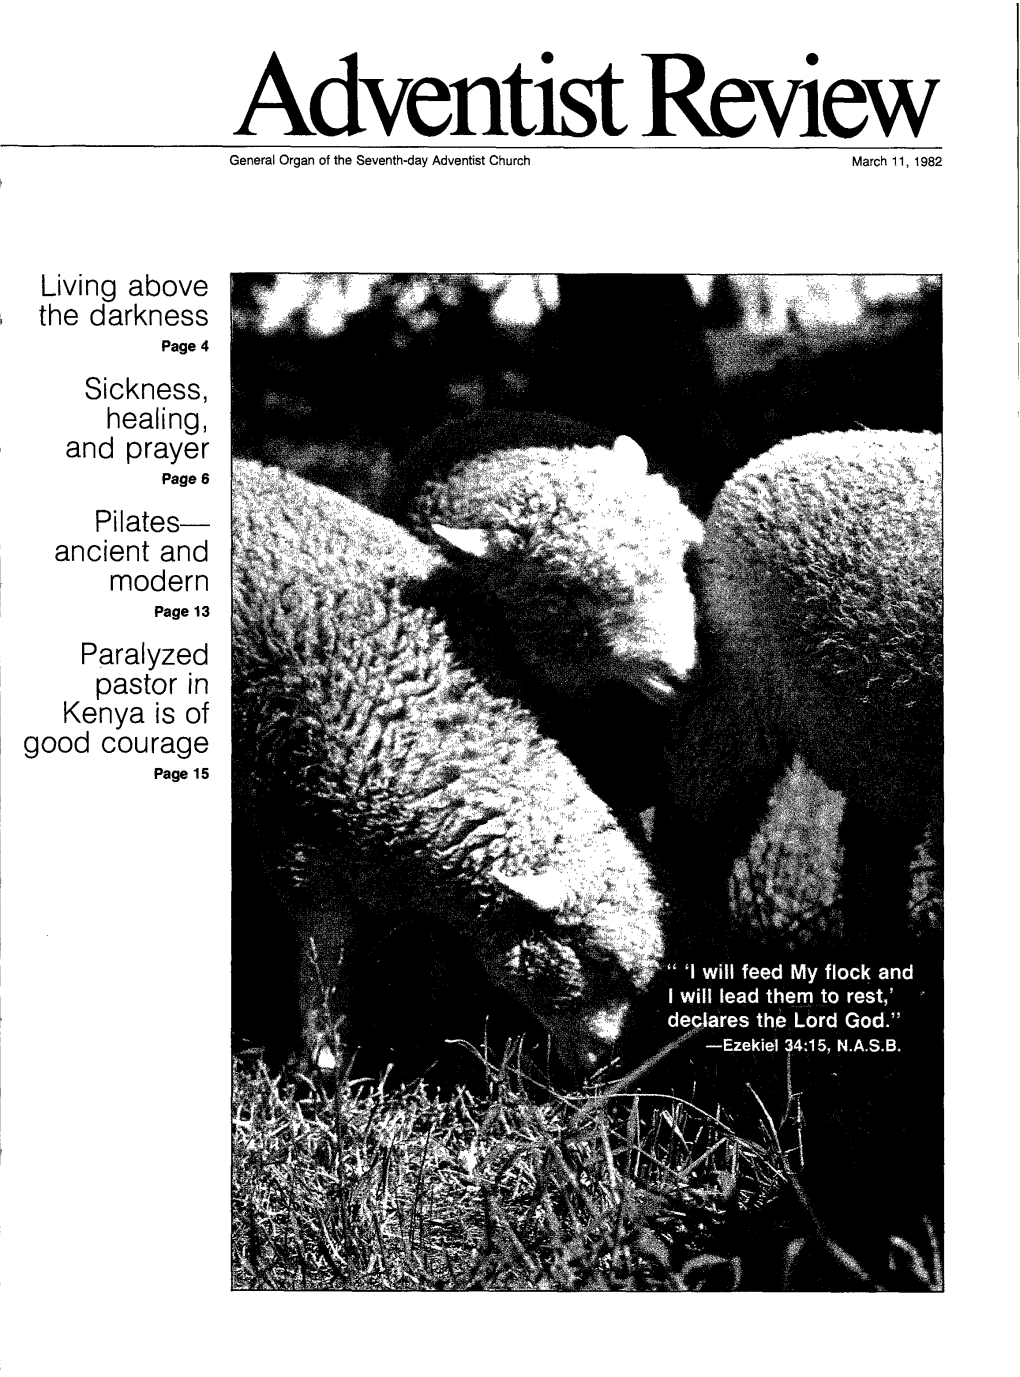 Adventist Review Lambs and Sheep Seem to Be Ellen Dana ("The Million- Calming Faith That Uplifts the a Part of Early Spring, When, in Dollar Telephone Call," P